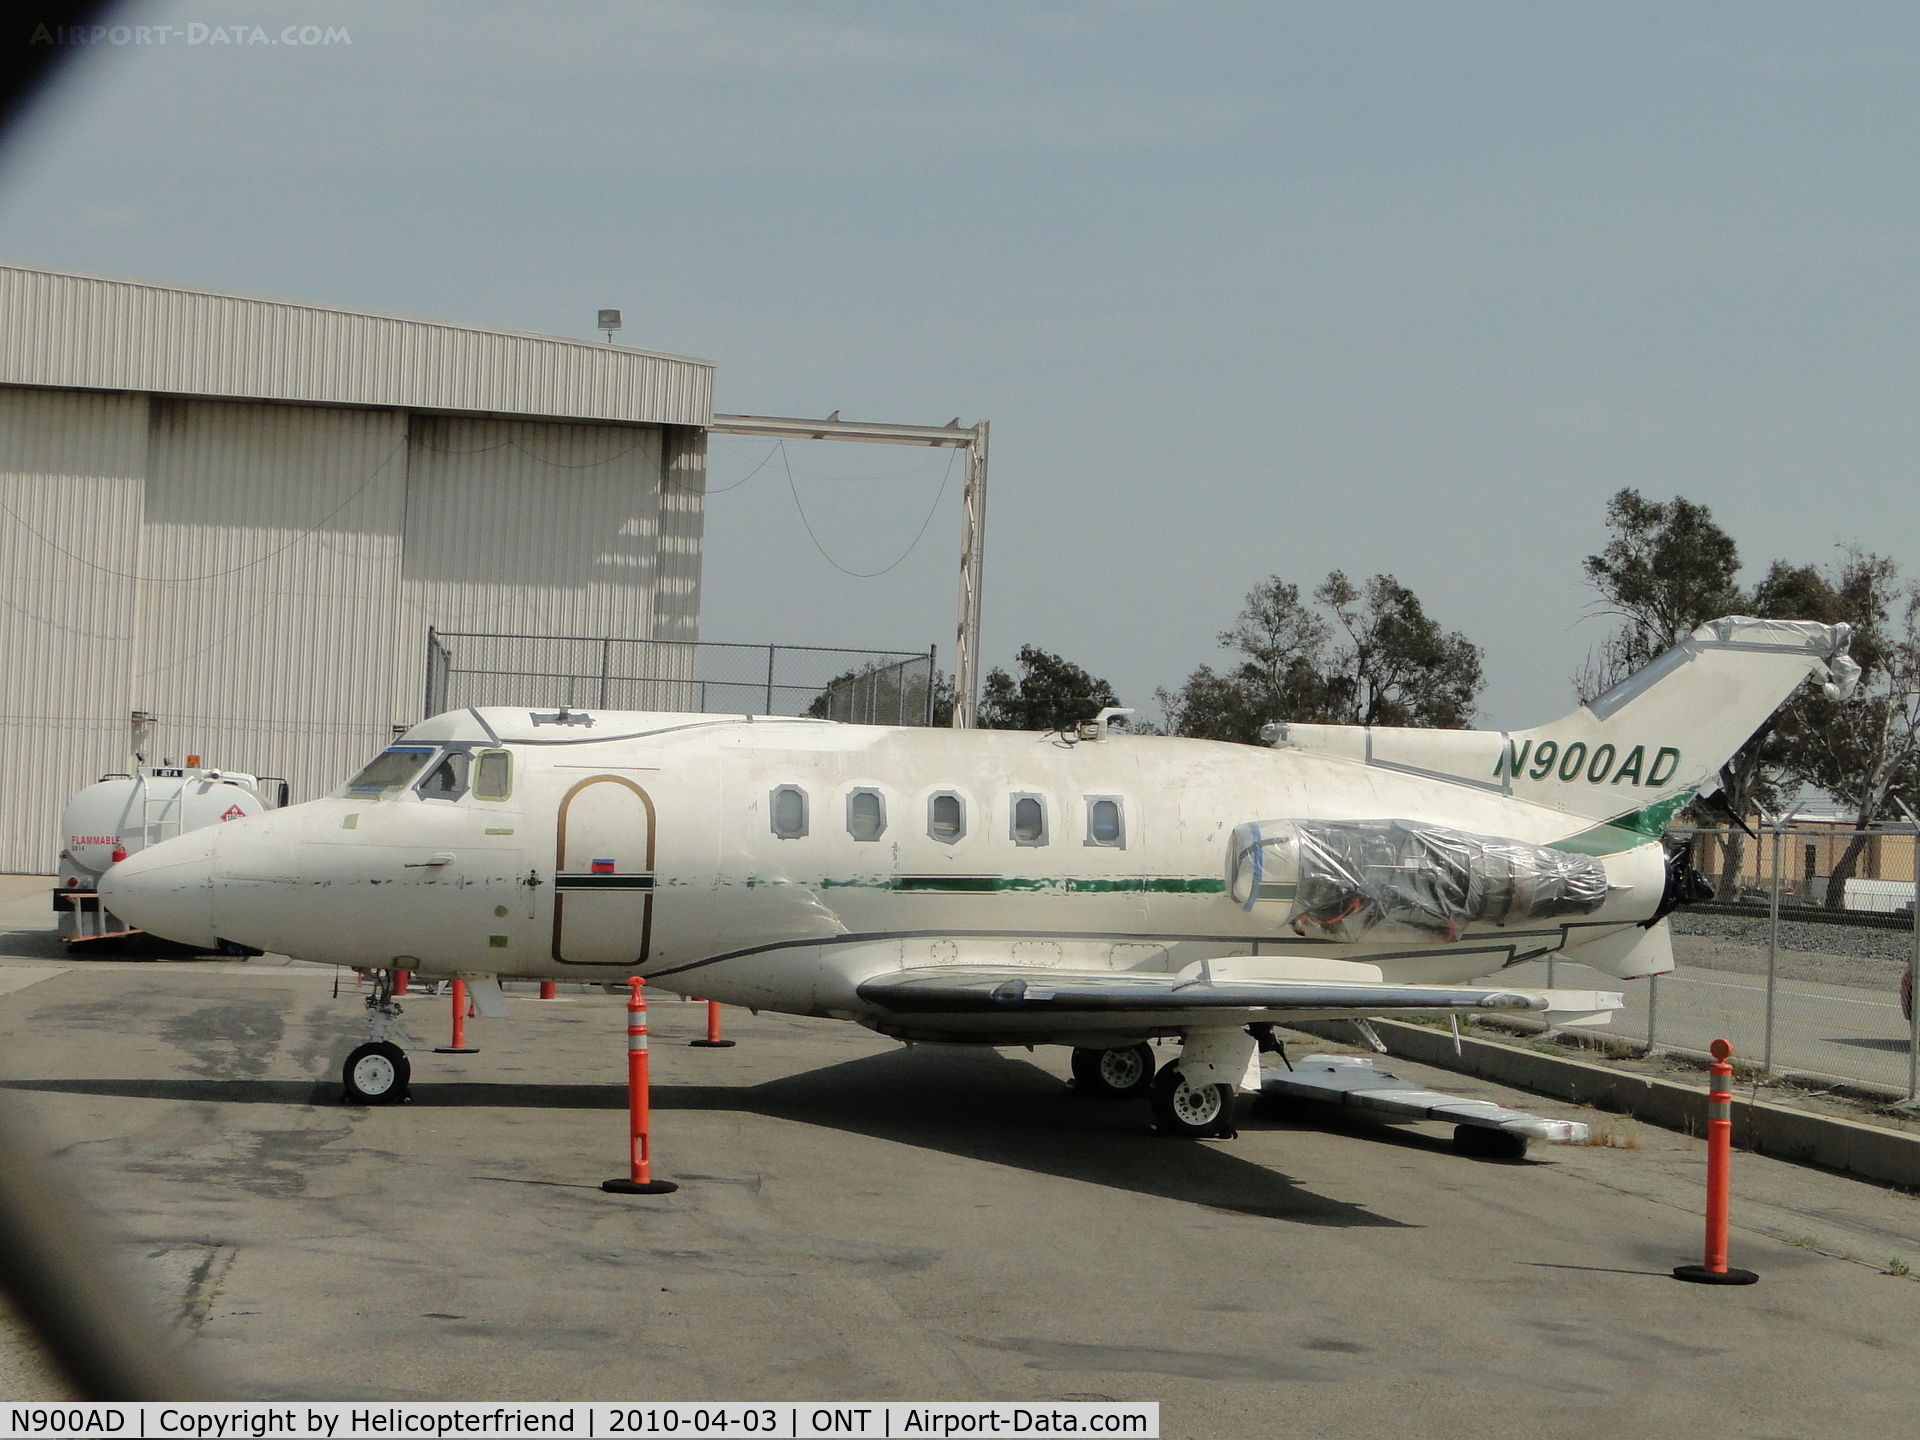 N900AD, 1971 Hawker Siddeley BH.125-400A C/N NA769, Looks like it's being readied to be painted